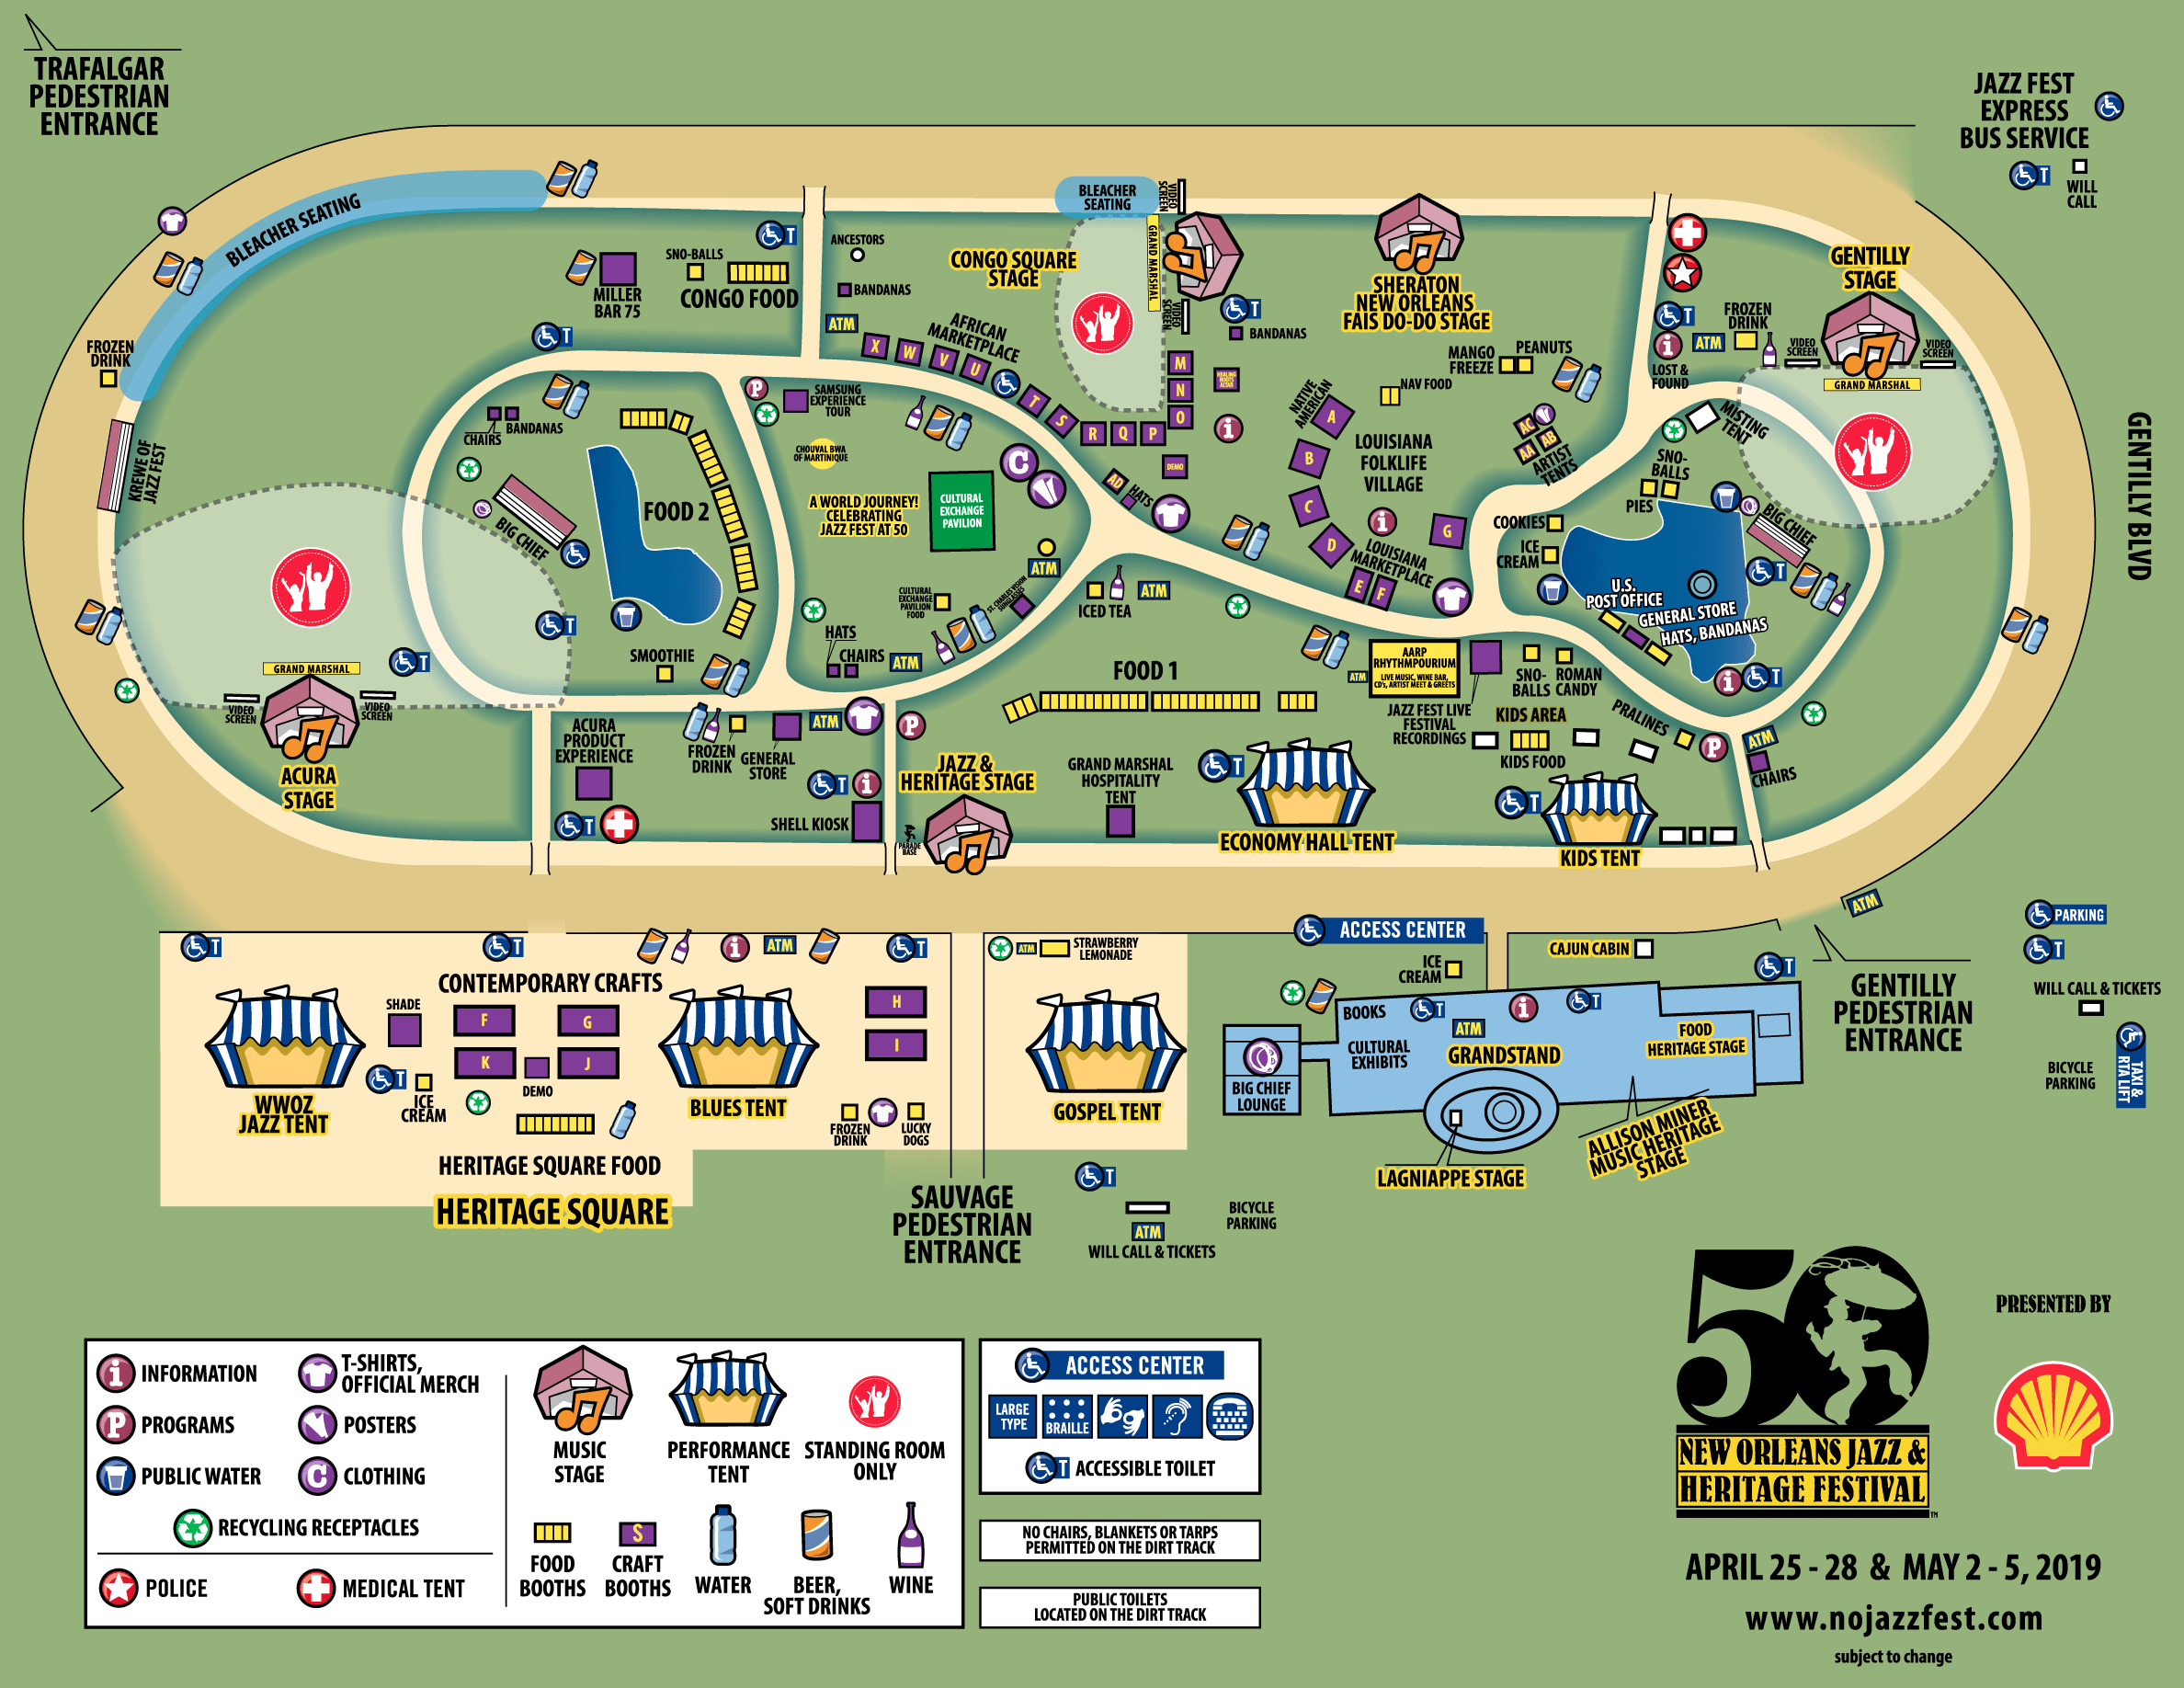 click-here-for-your-2019-new-orleans-jazz-heritage-festival-map